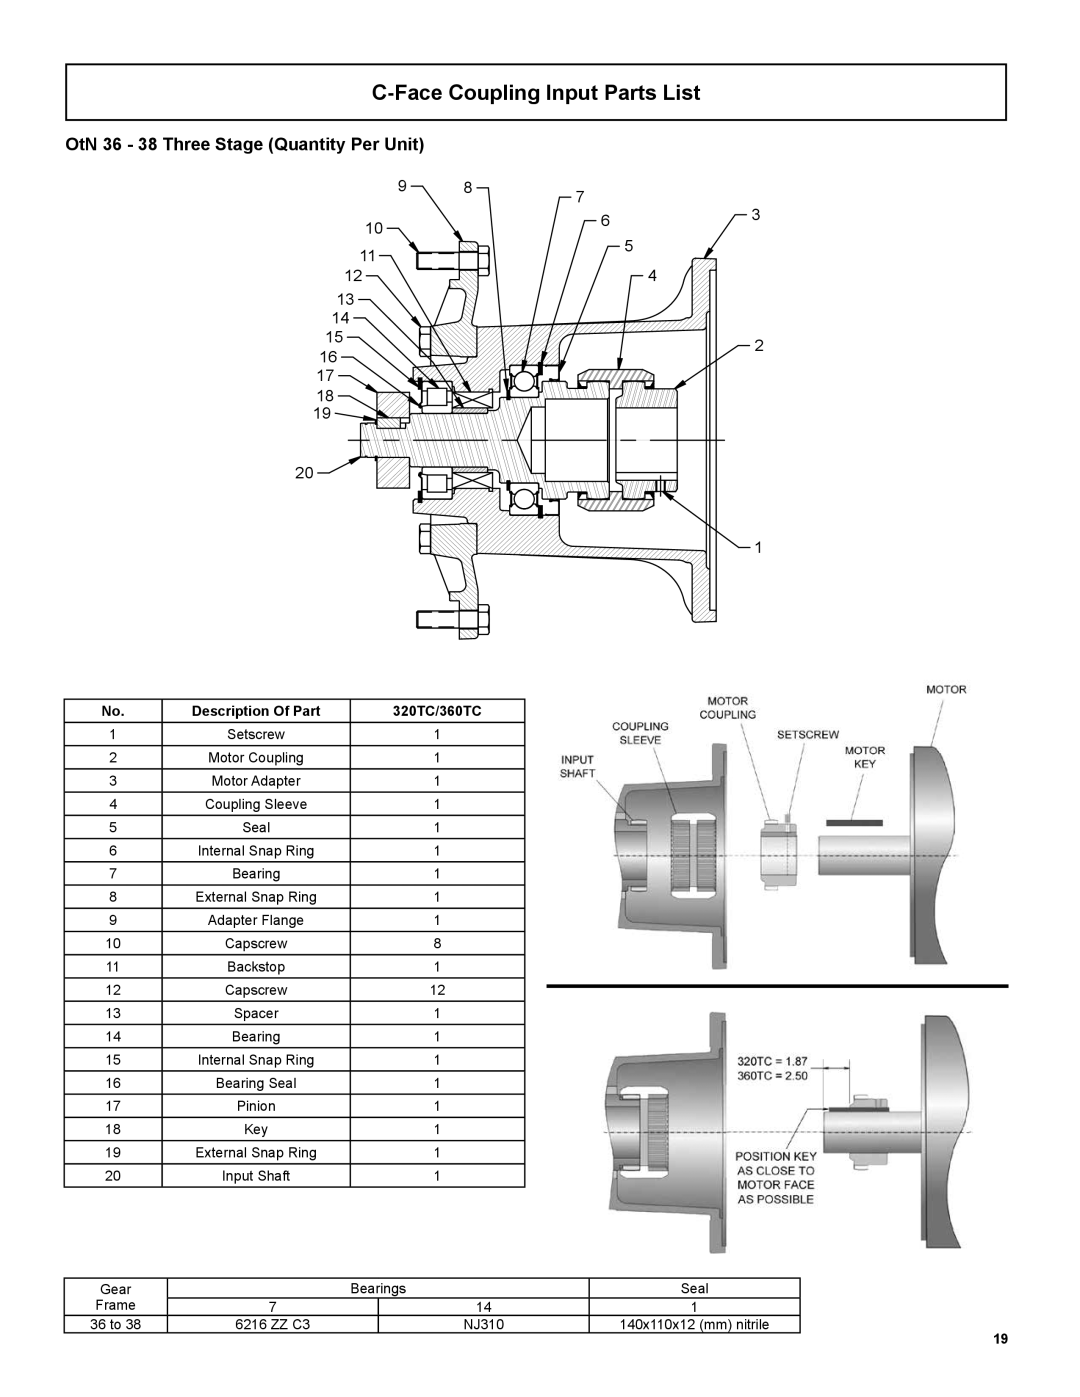 Emerson 3000 installation instructions C-FaceCoupling Input Parts List, OtN 36 - 38 Three Stage Quantity Per Unit 